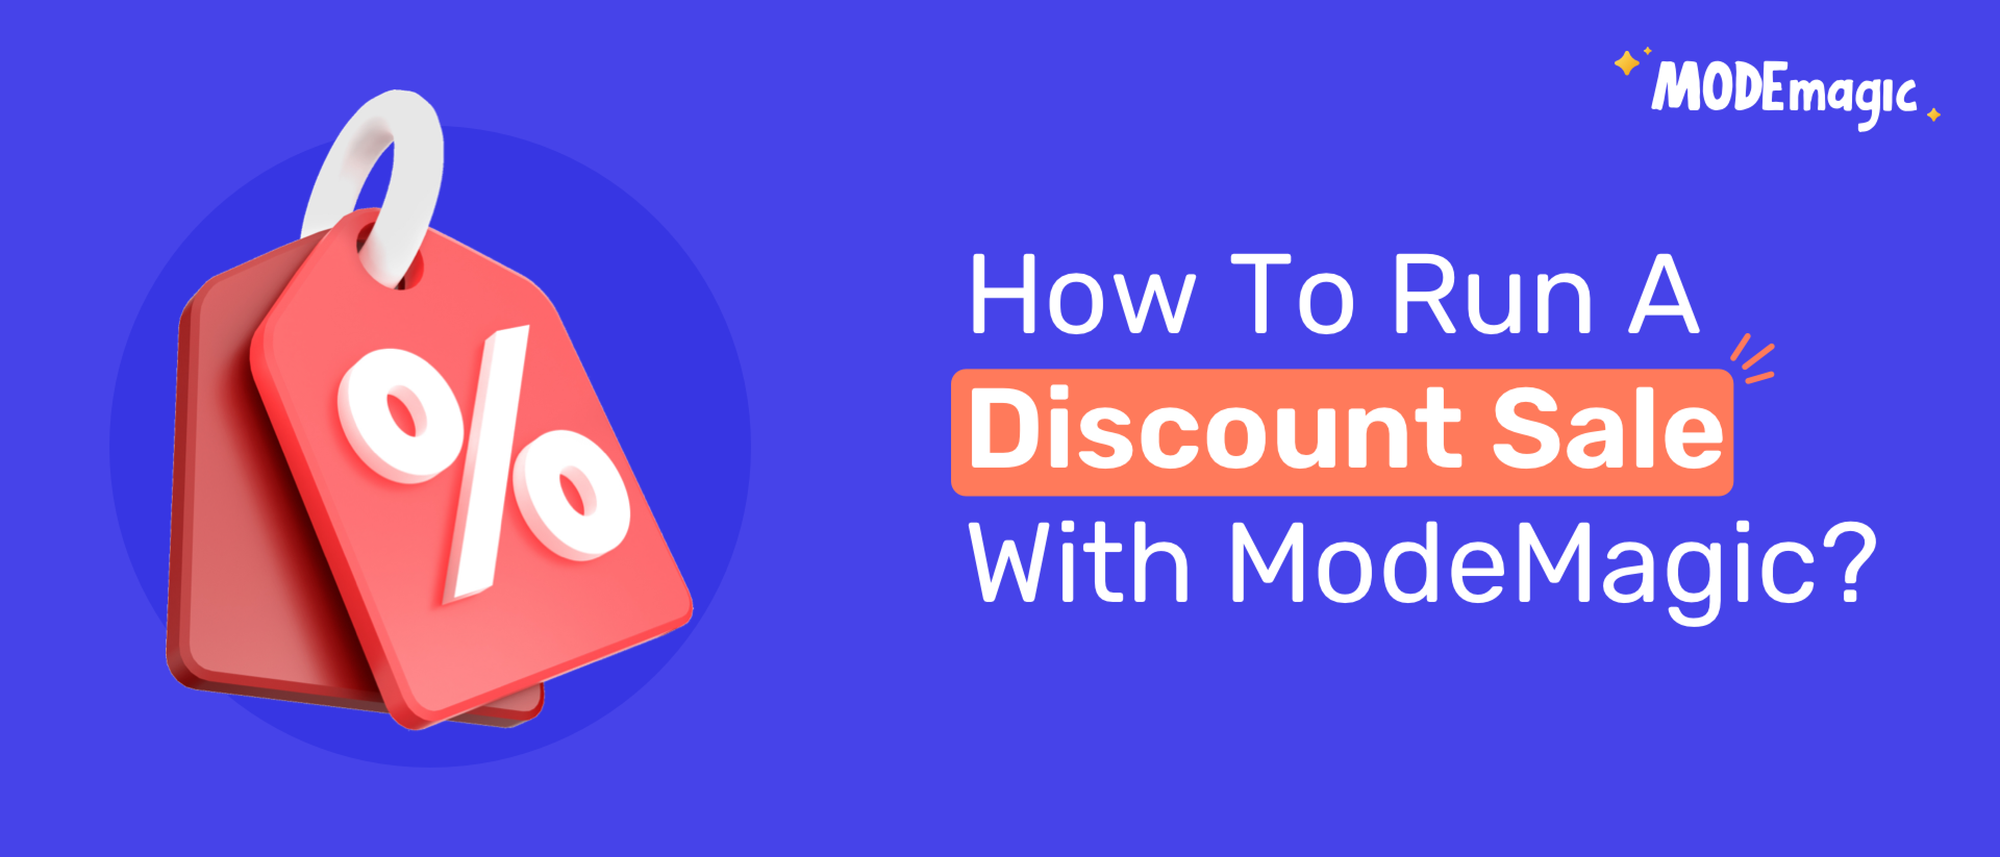 BFCM 2022 | How to Run a Discount Sale with ModeMagic 3.0